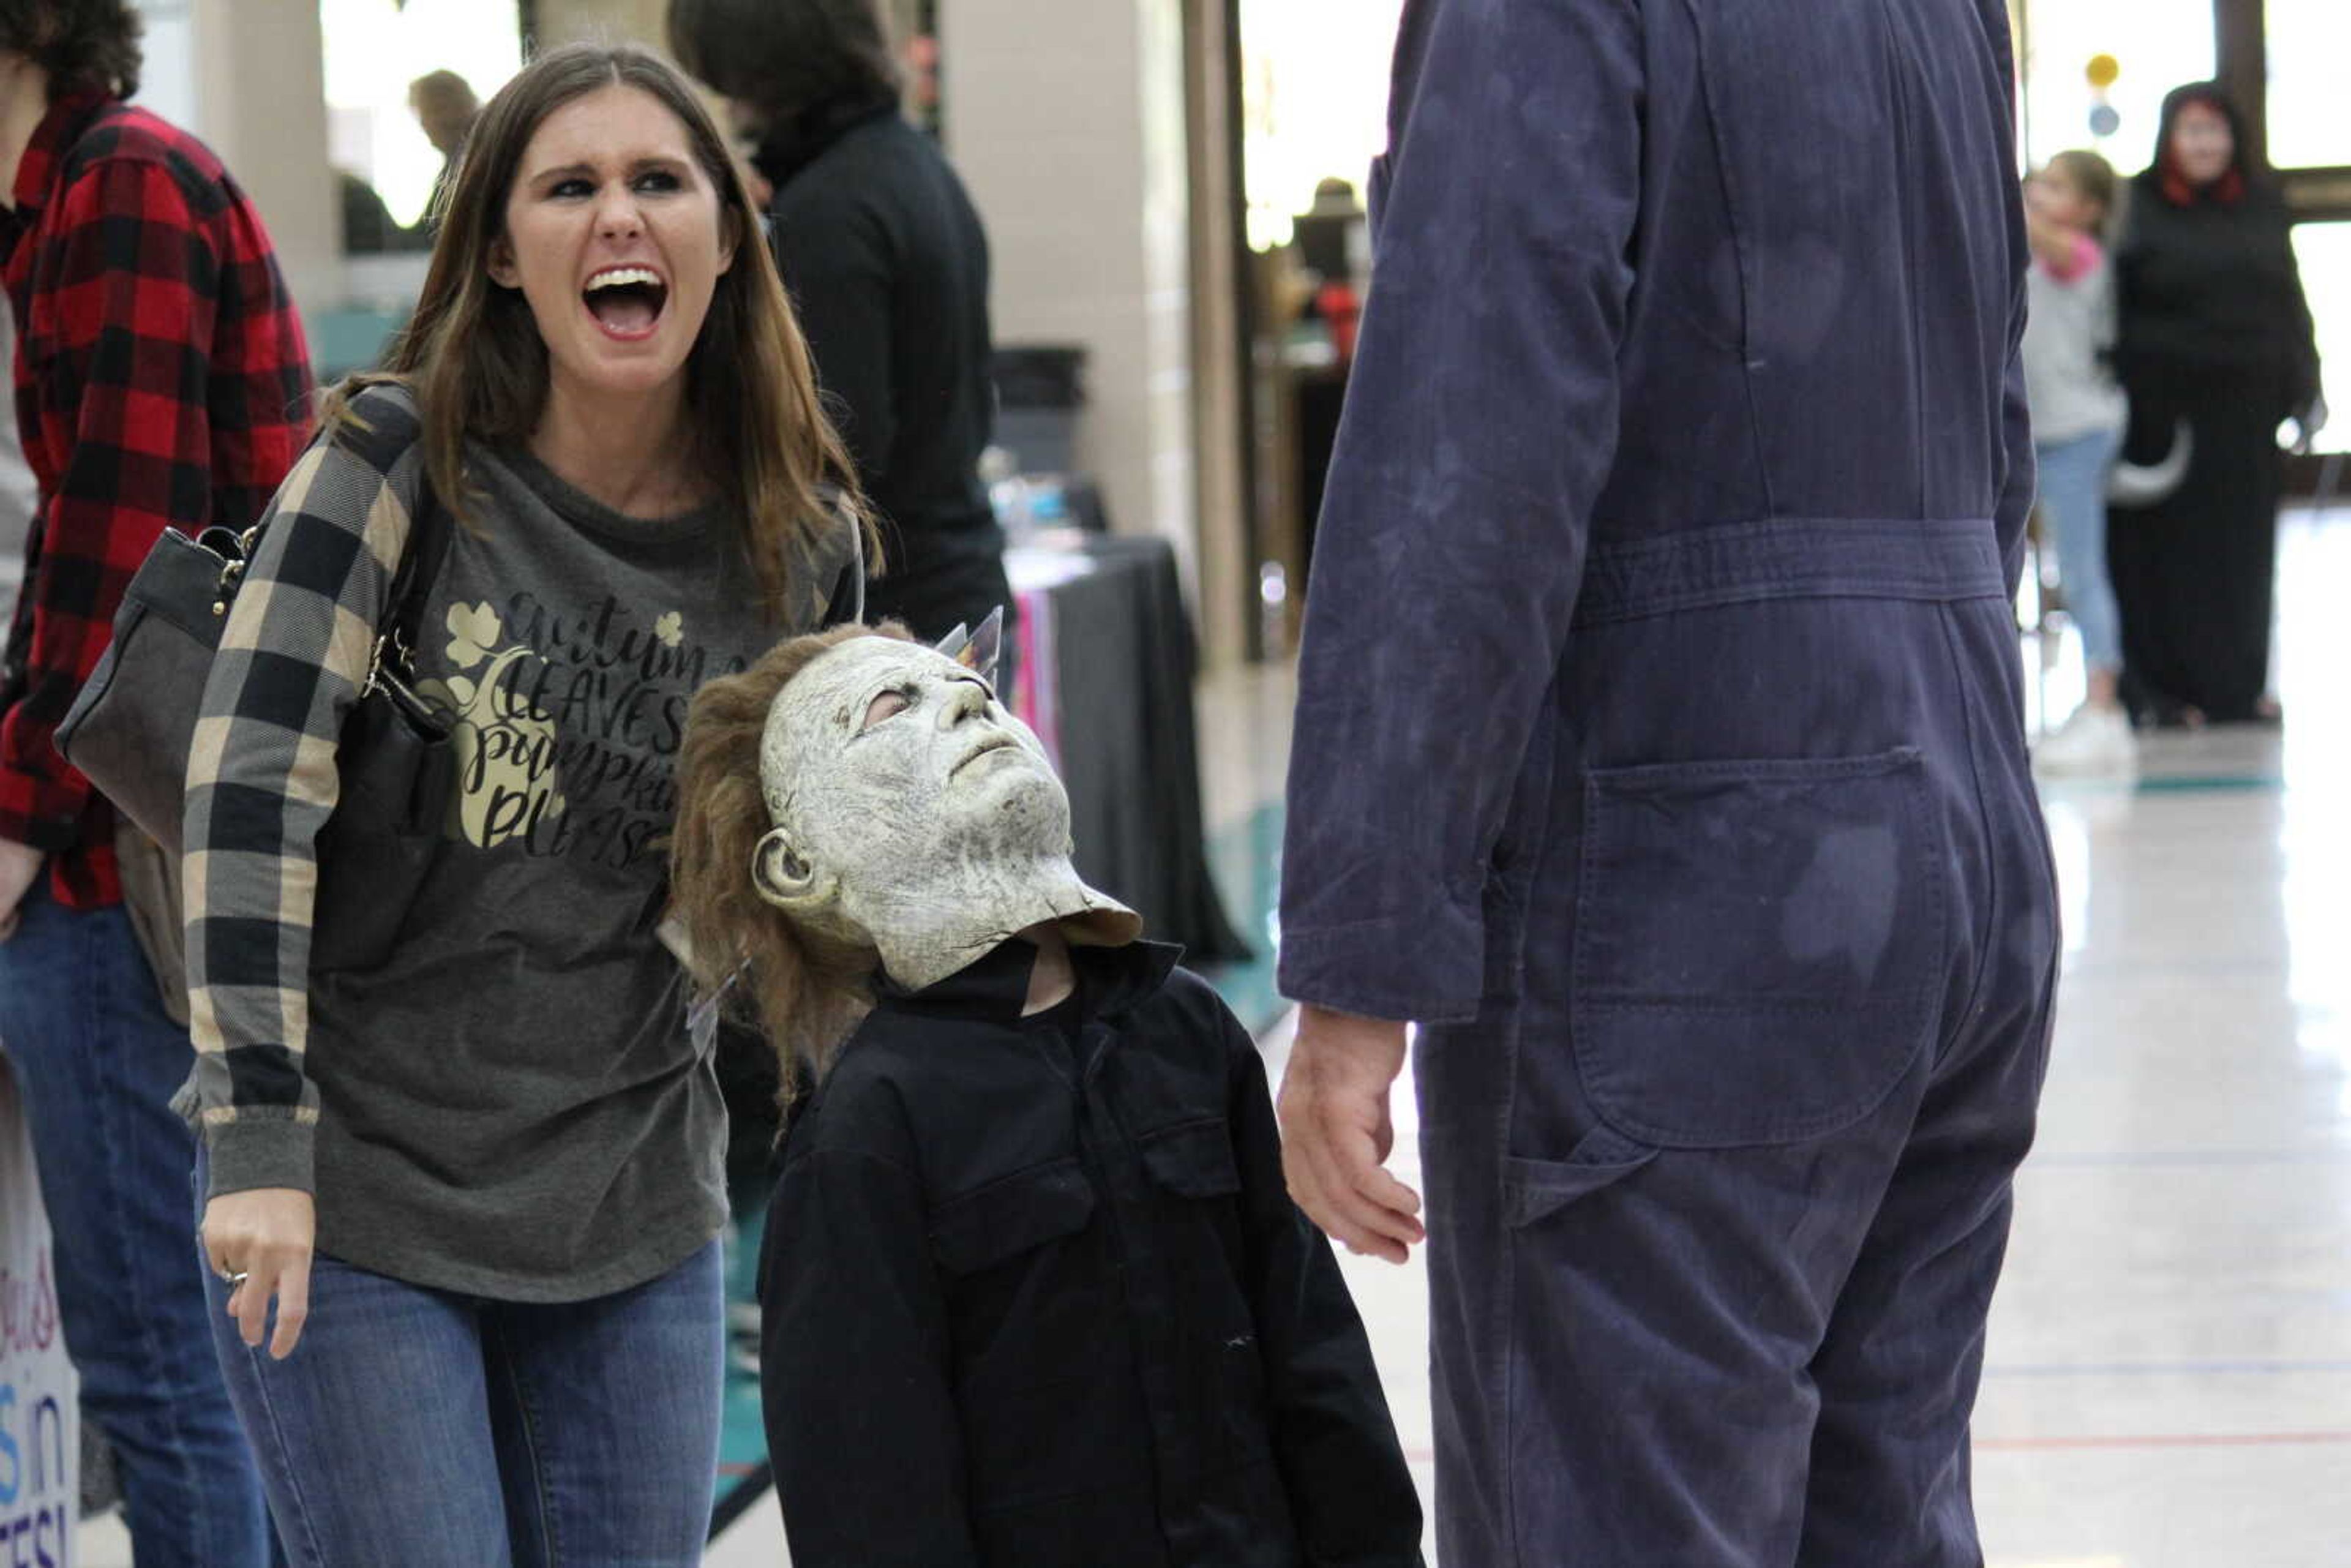 Local convention brings the horror fans to Cape Girardeau